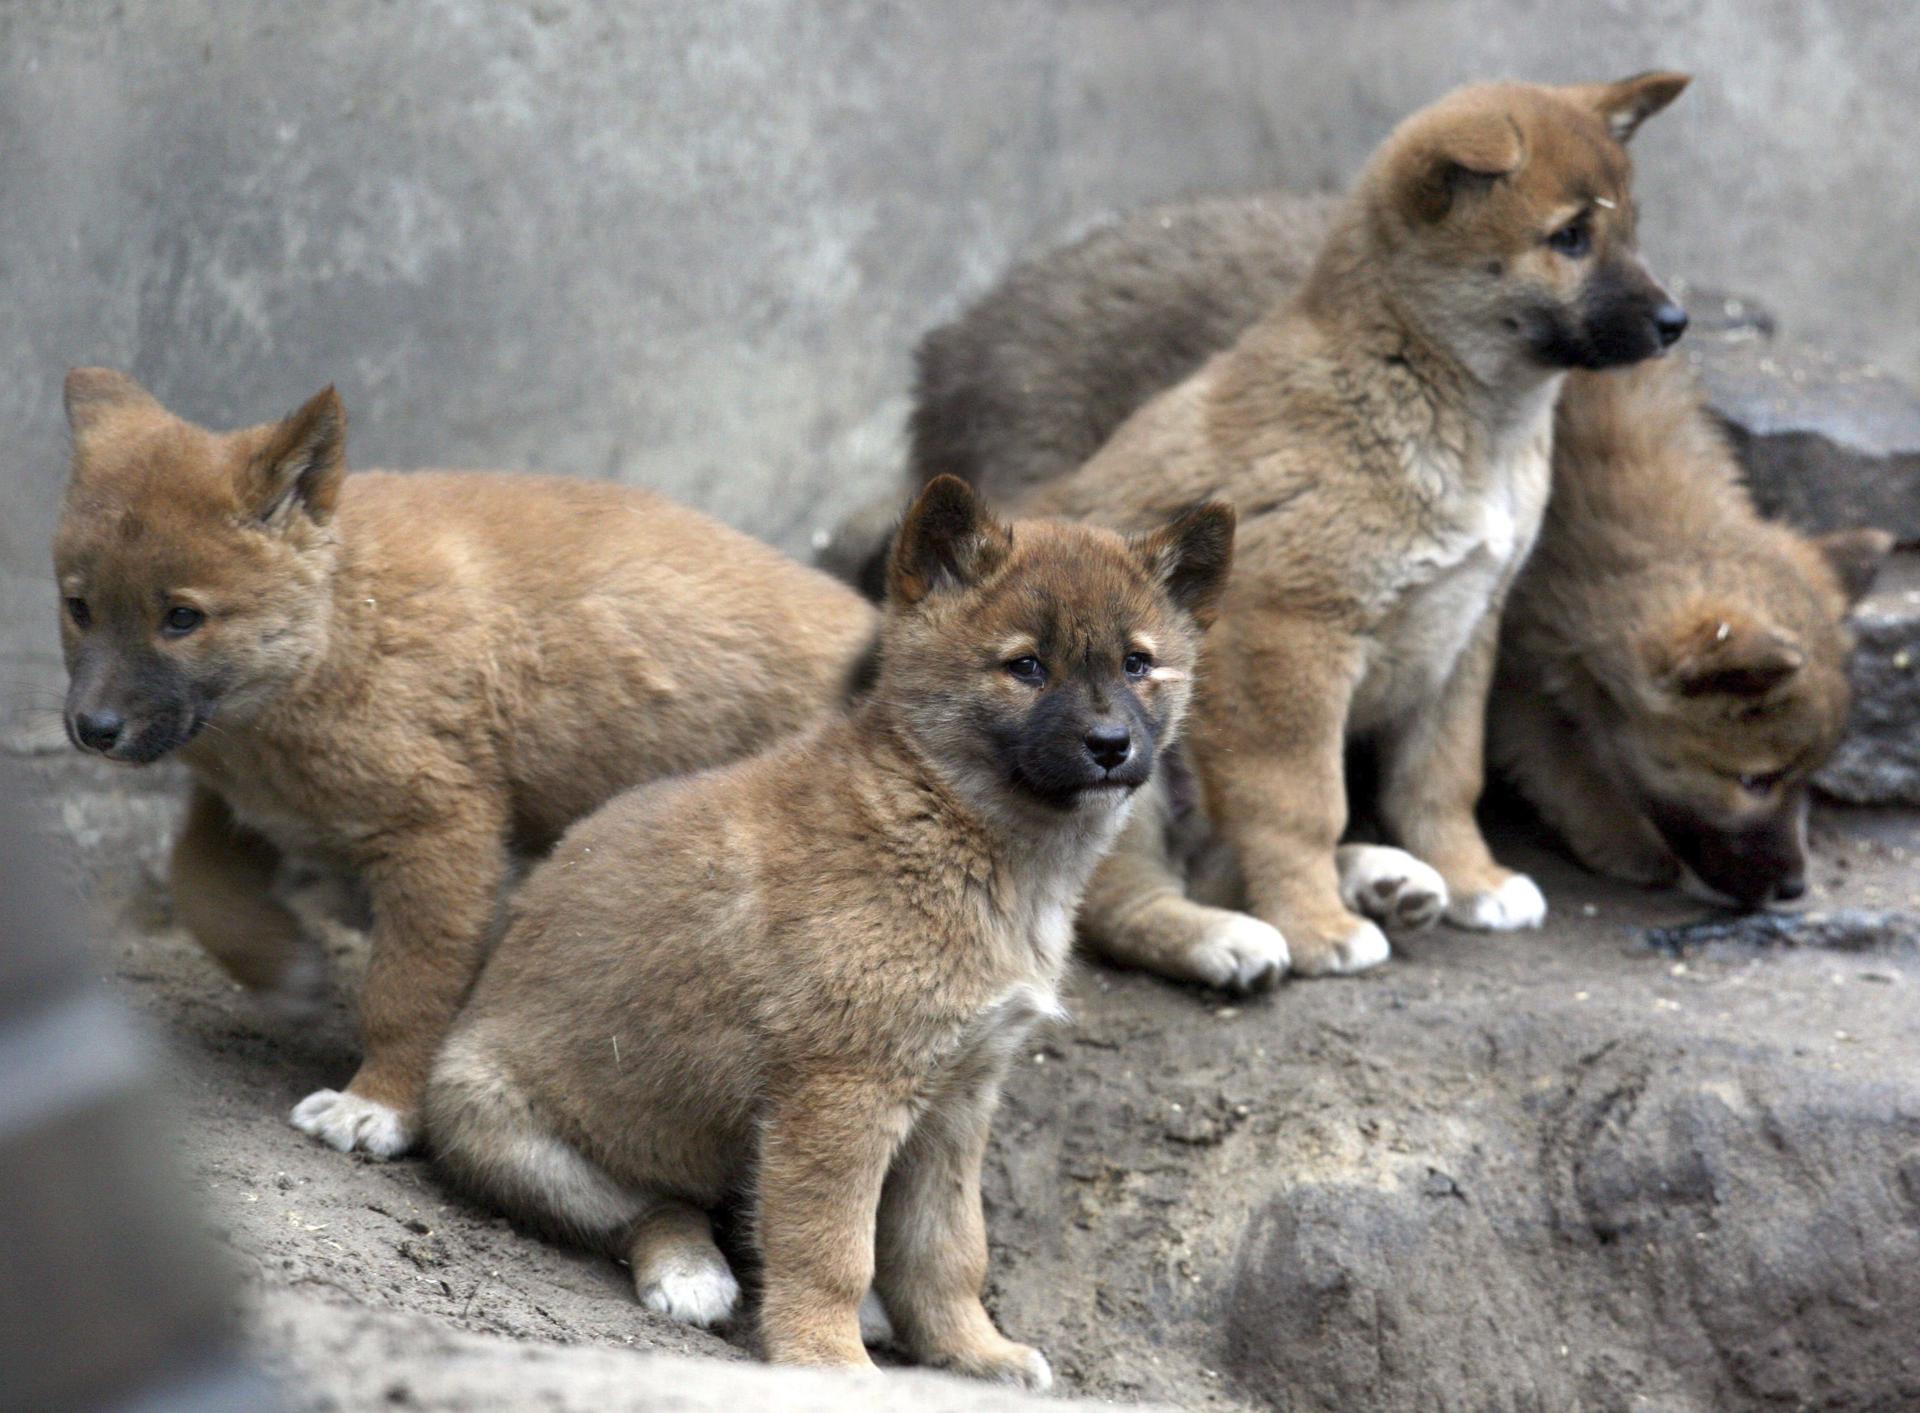 A file picture showing dingo puppies at the Tierpark zoo in Berlin, Germany. EPA/EFE/FILE/STEPHANIE PILICK